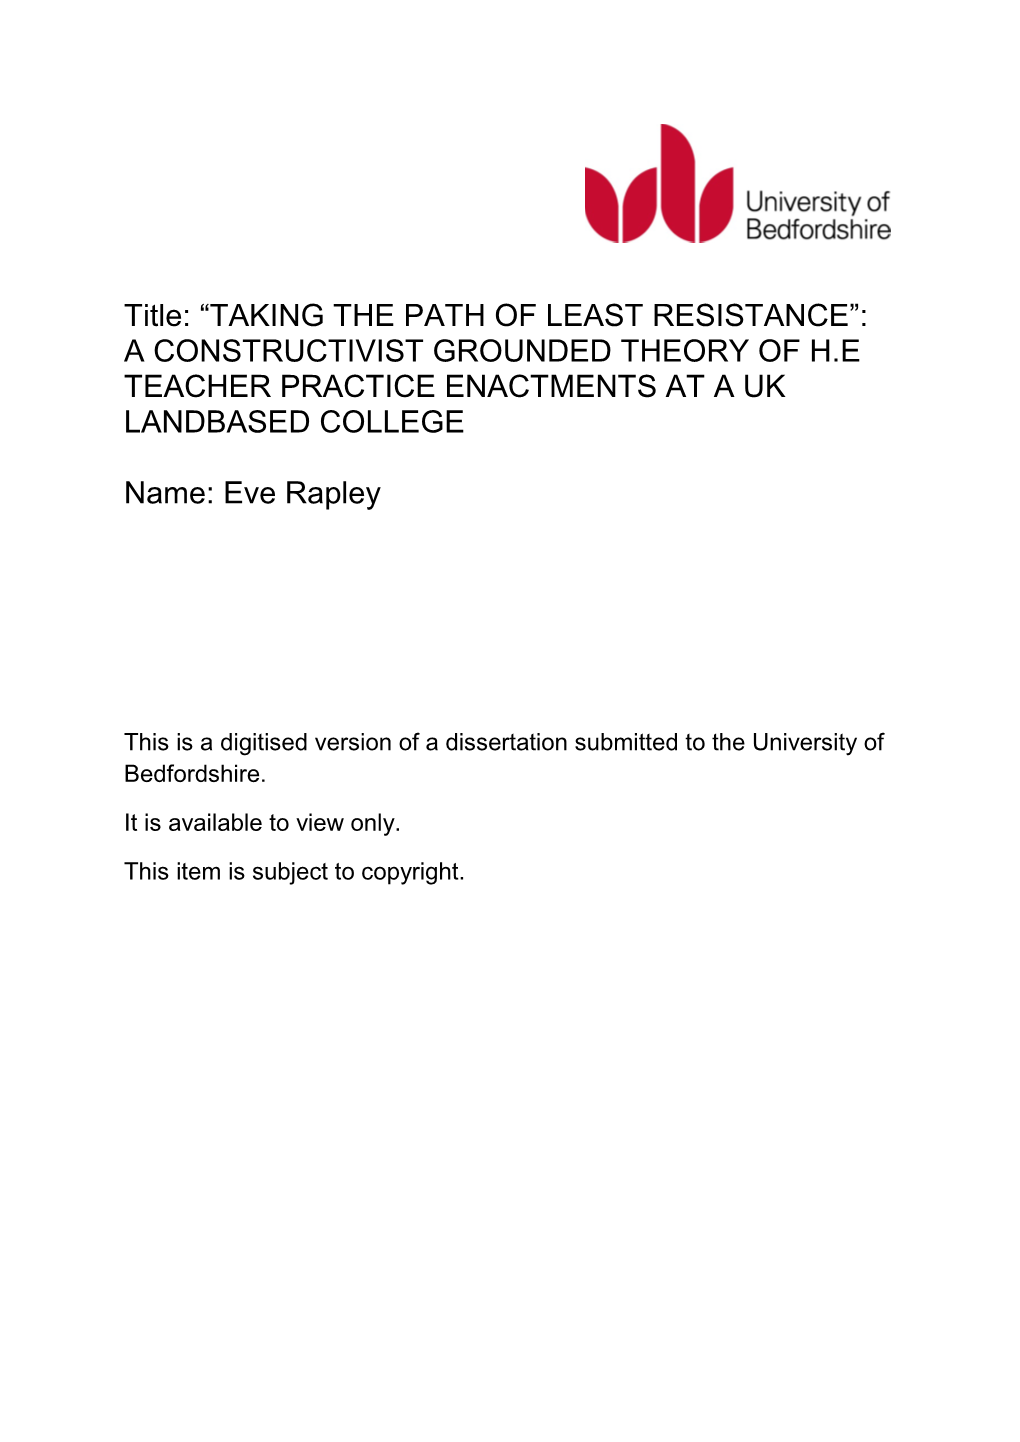 A Constructivist Grounded Theory of HE Teacher Practice Enactments at a Landbased College